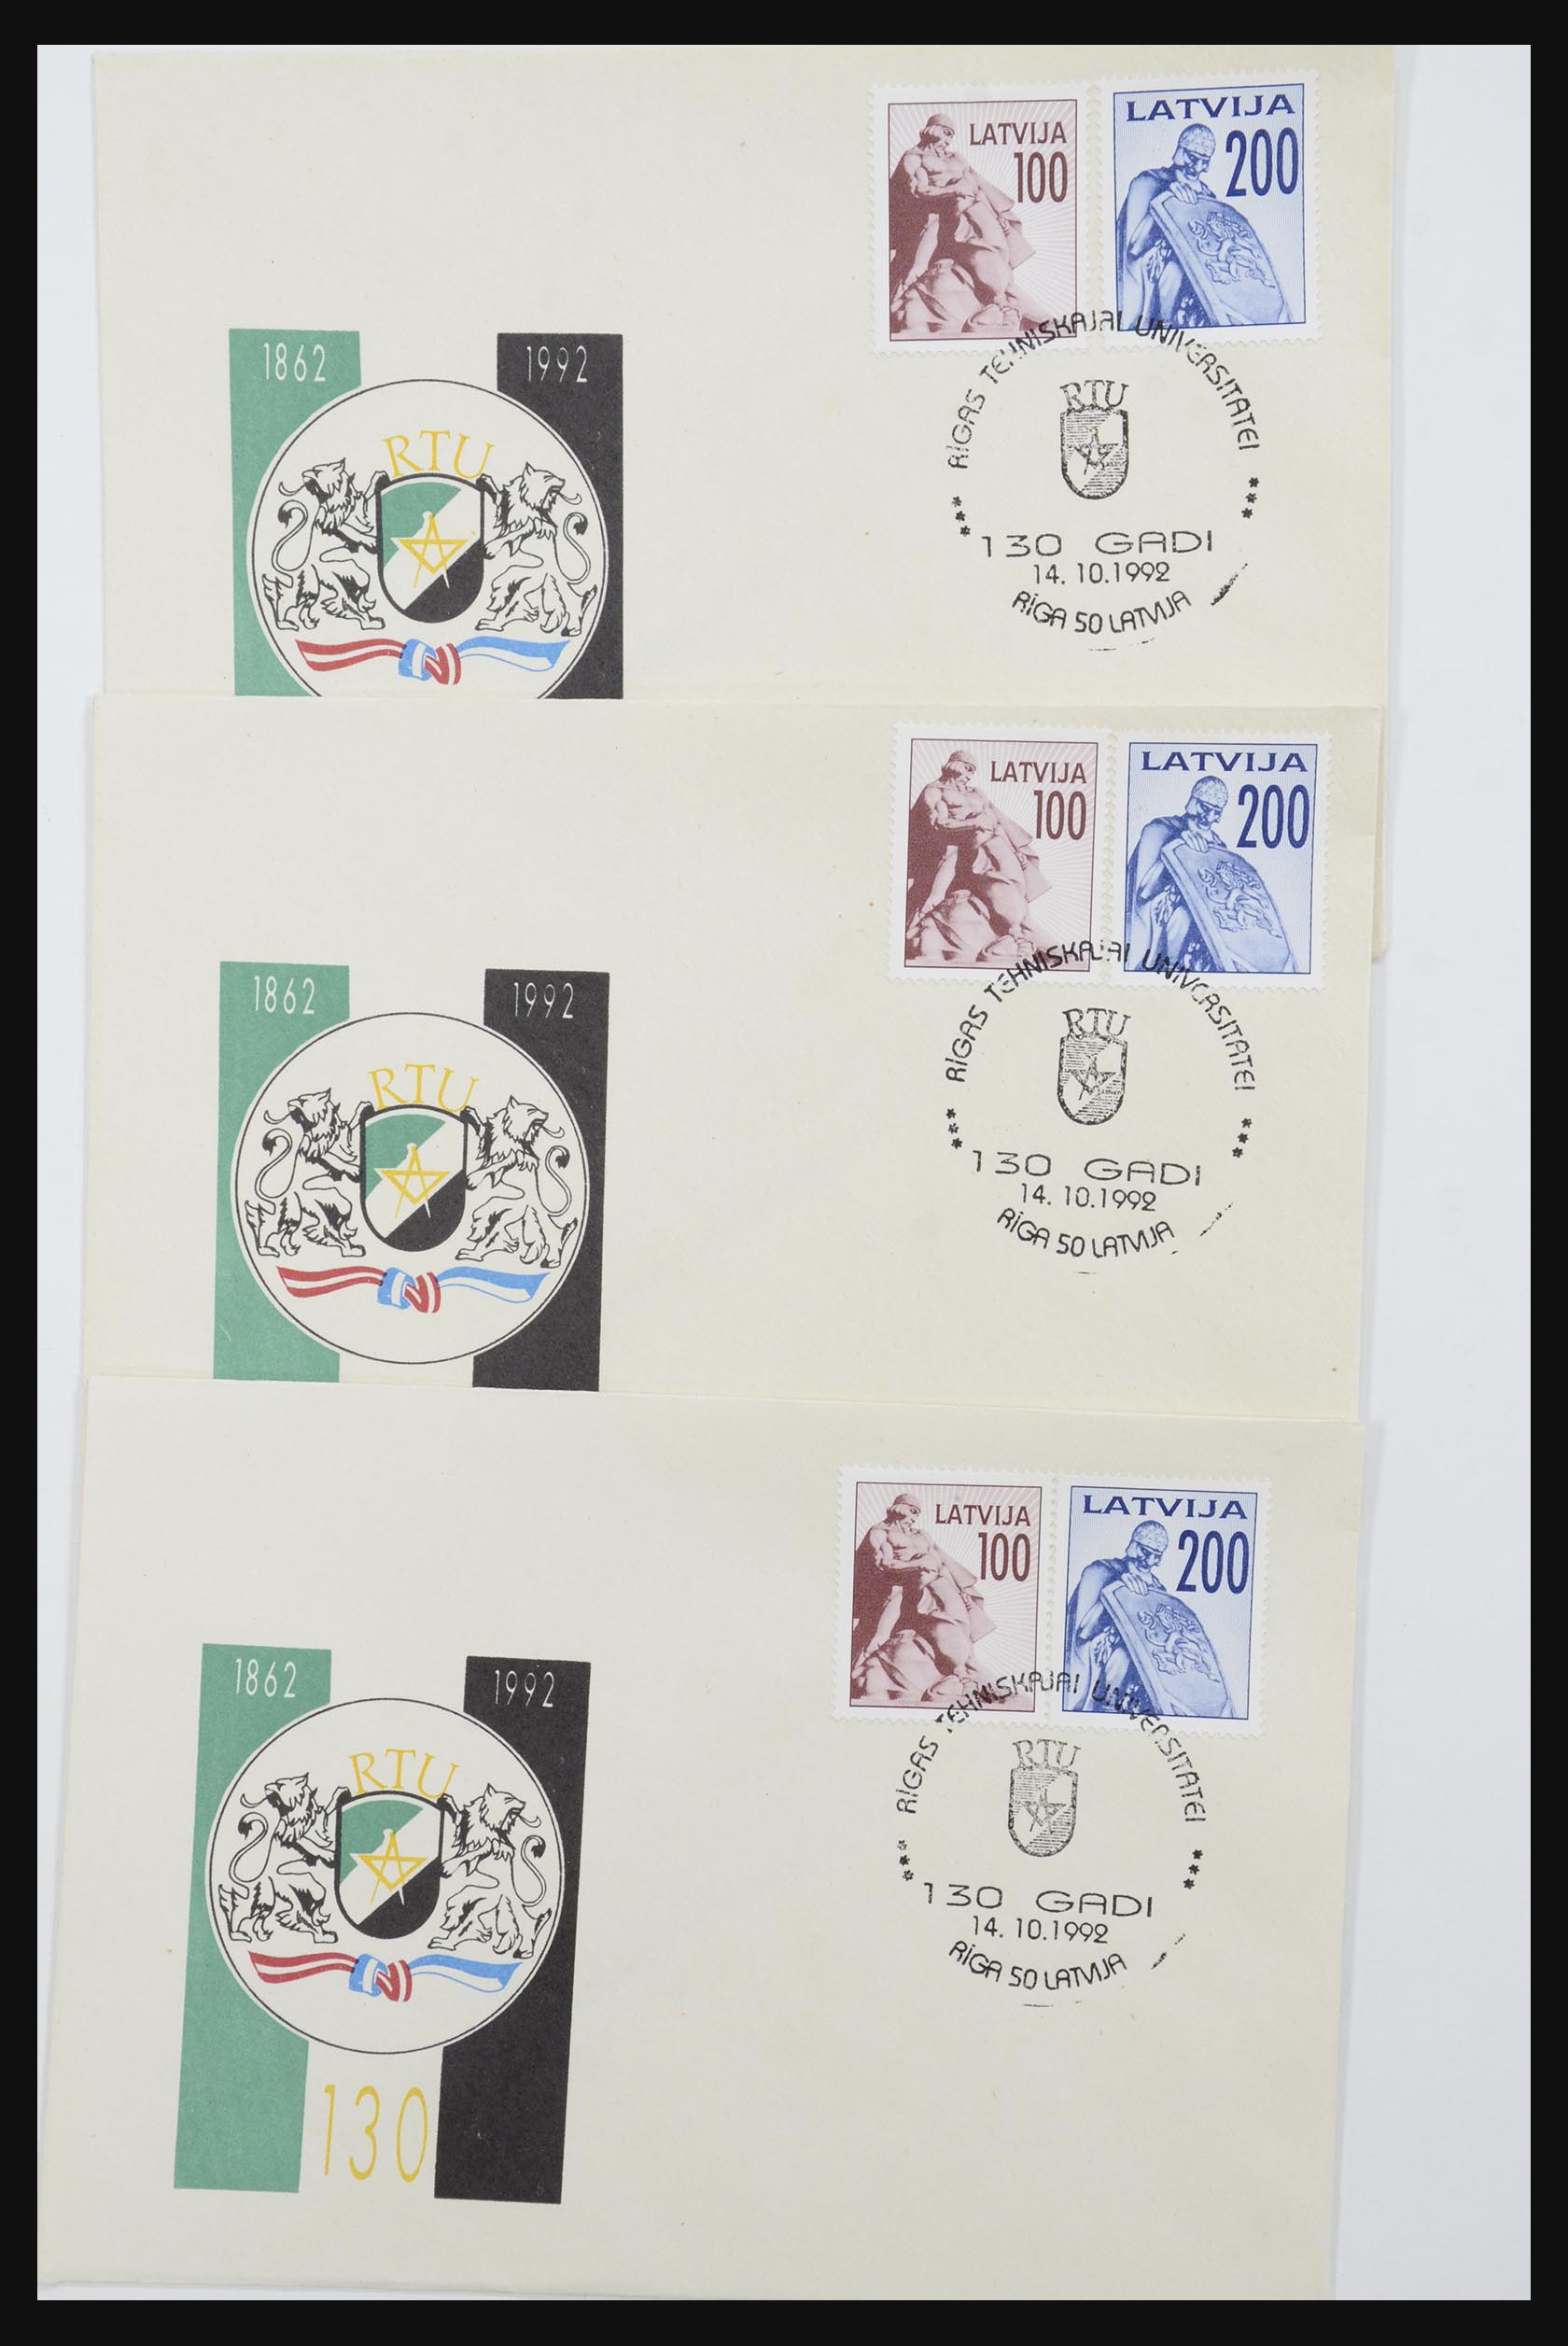 31584 643 - 31584 Latvia covers/FDC's and postal stationeries 1990-1992.